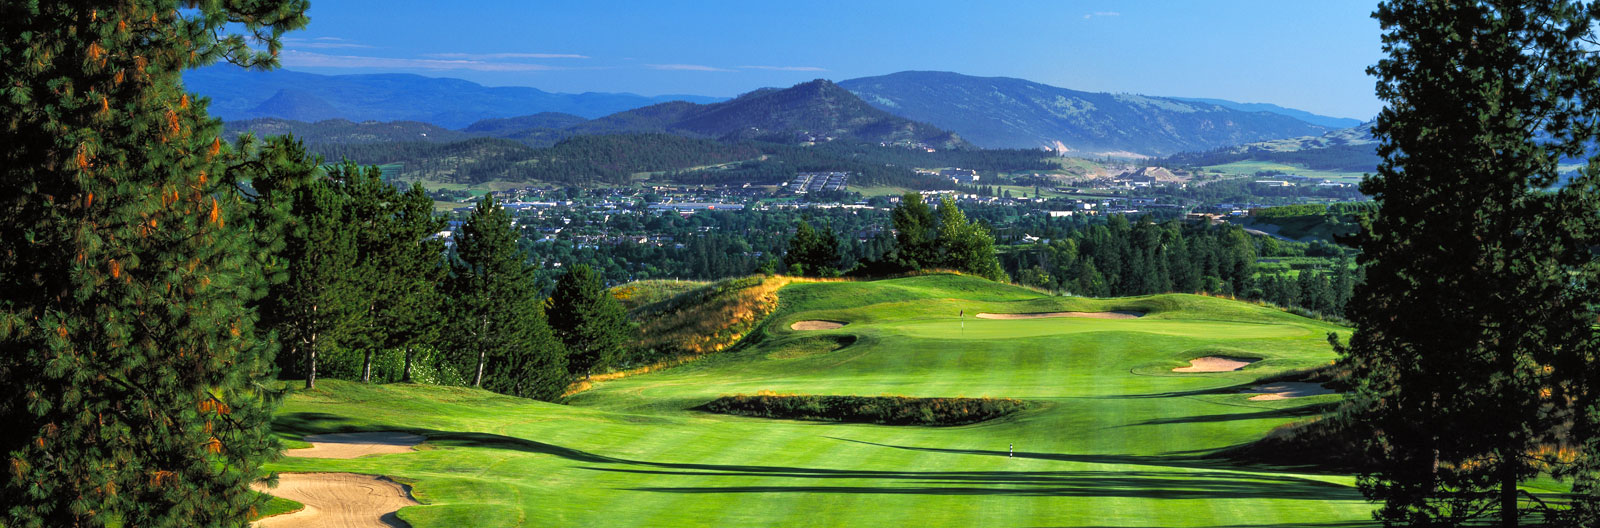 Gallaghers Canyon Golf Country Club Kelowna Golf Courses intended for Golfing Kelowna